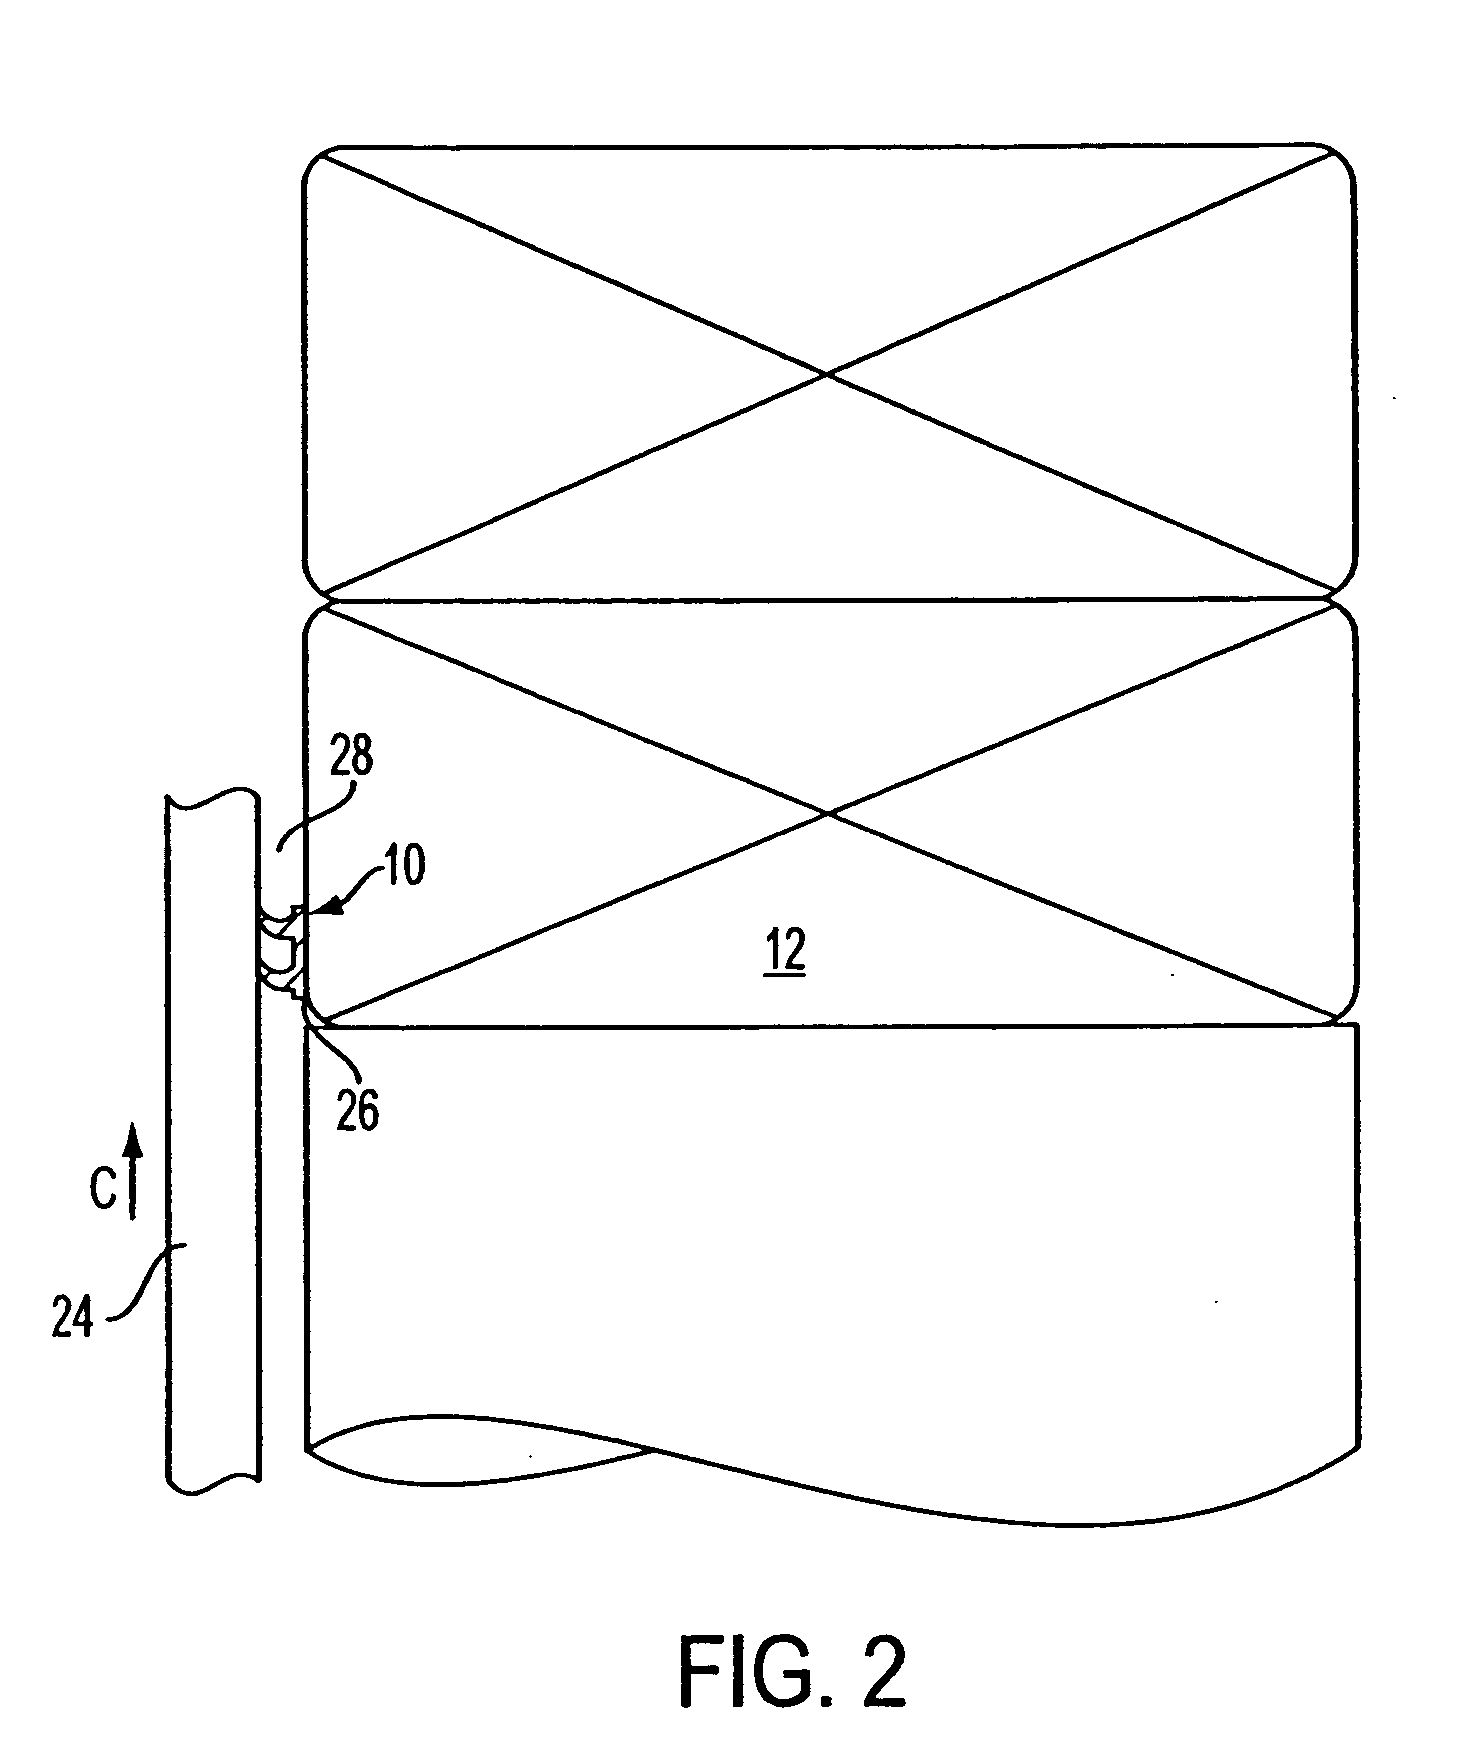 Methods and structures for sealing air gaps in a building